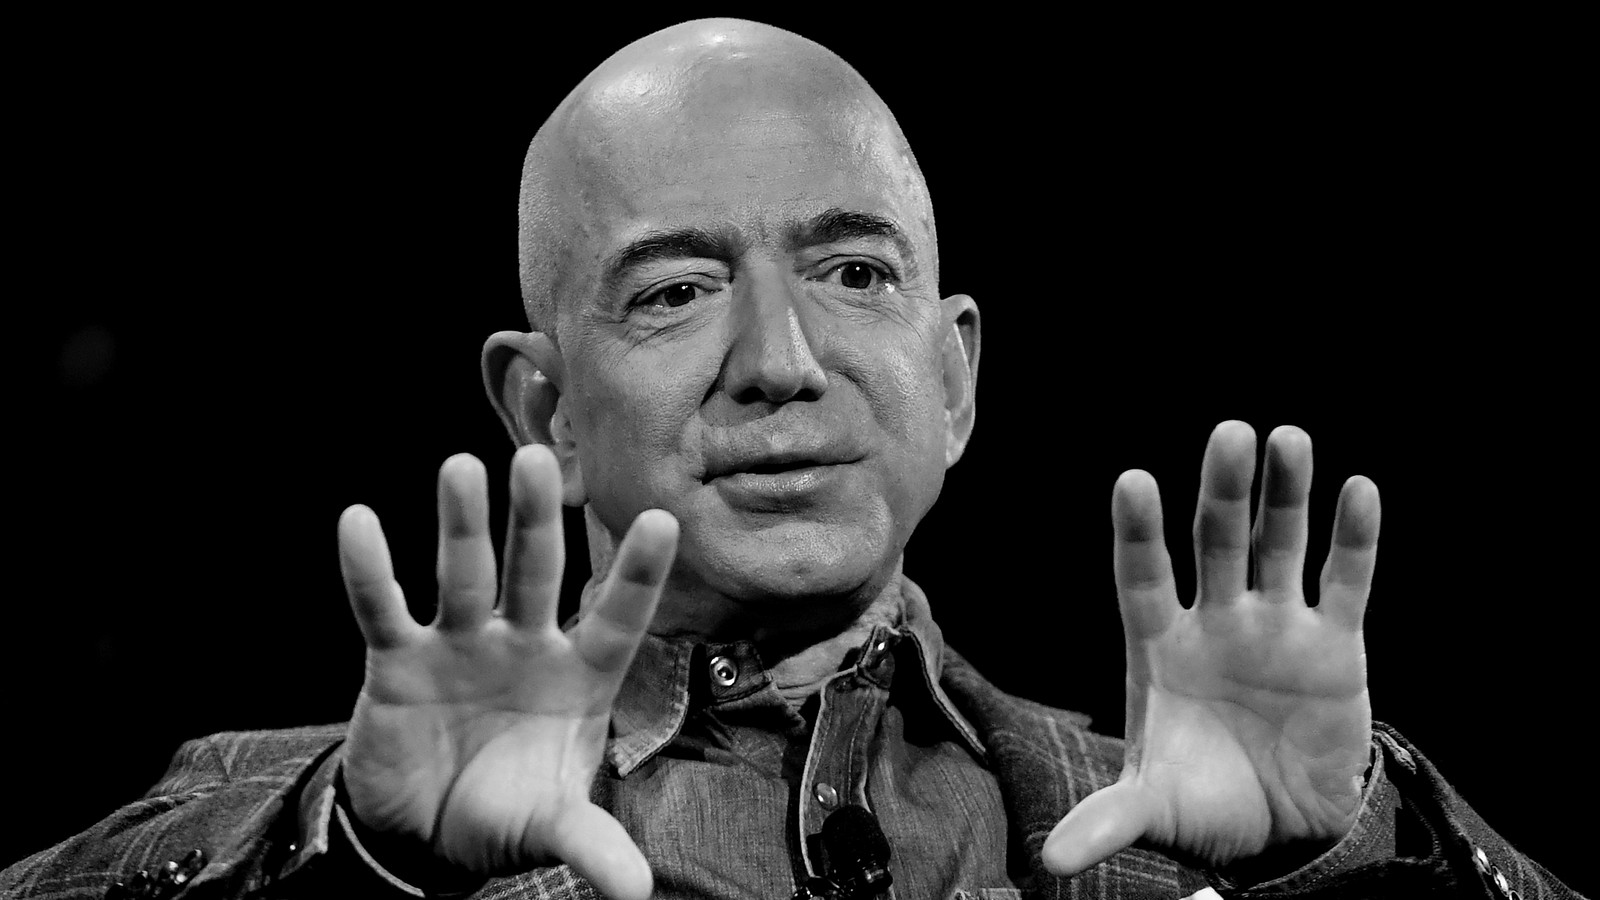 How jeff bezos is spending his billion earth fund